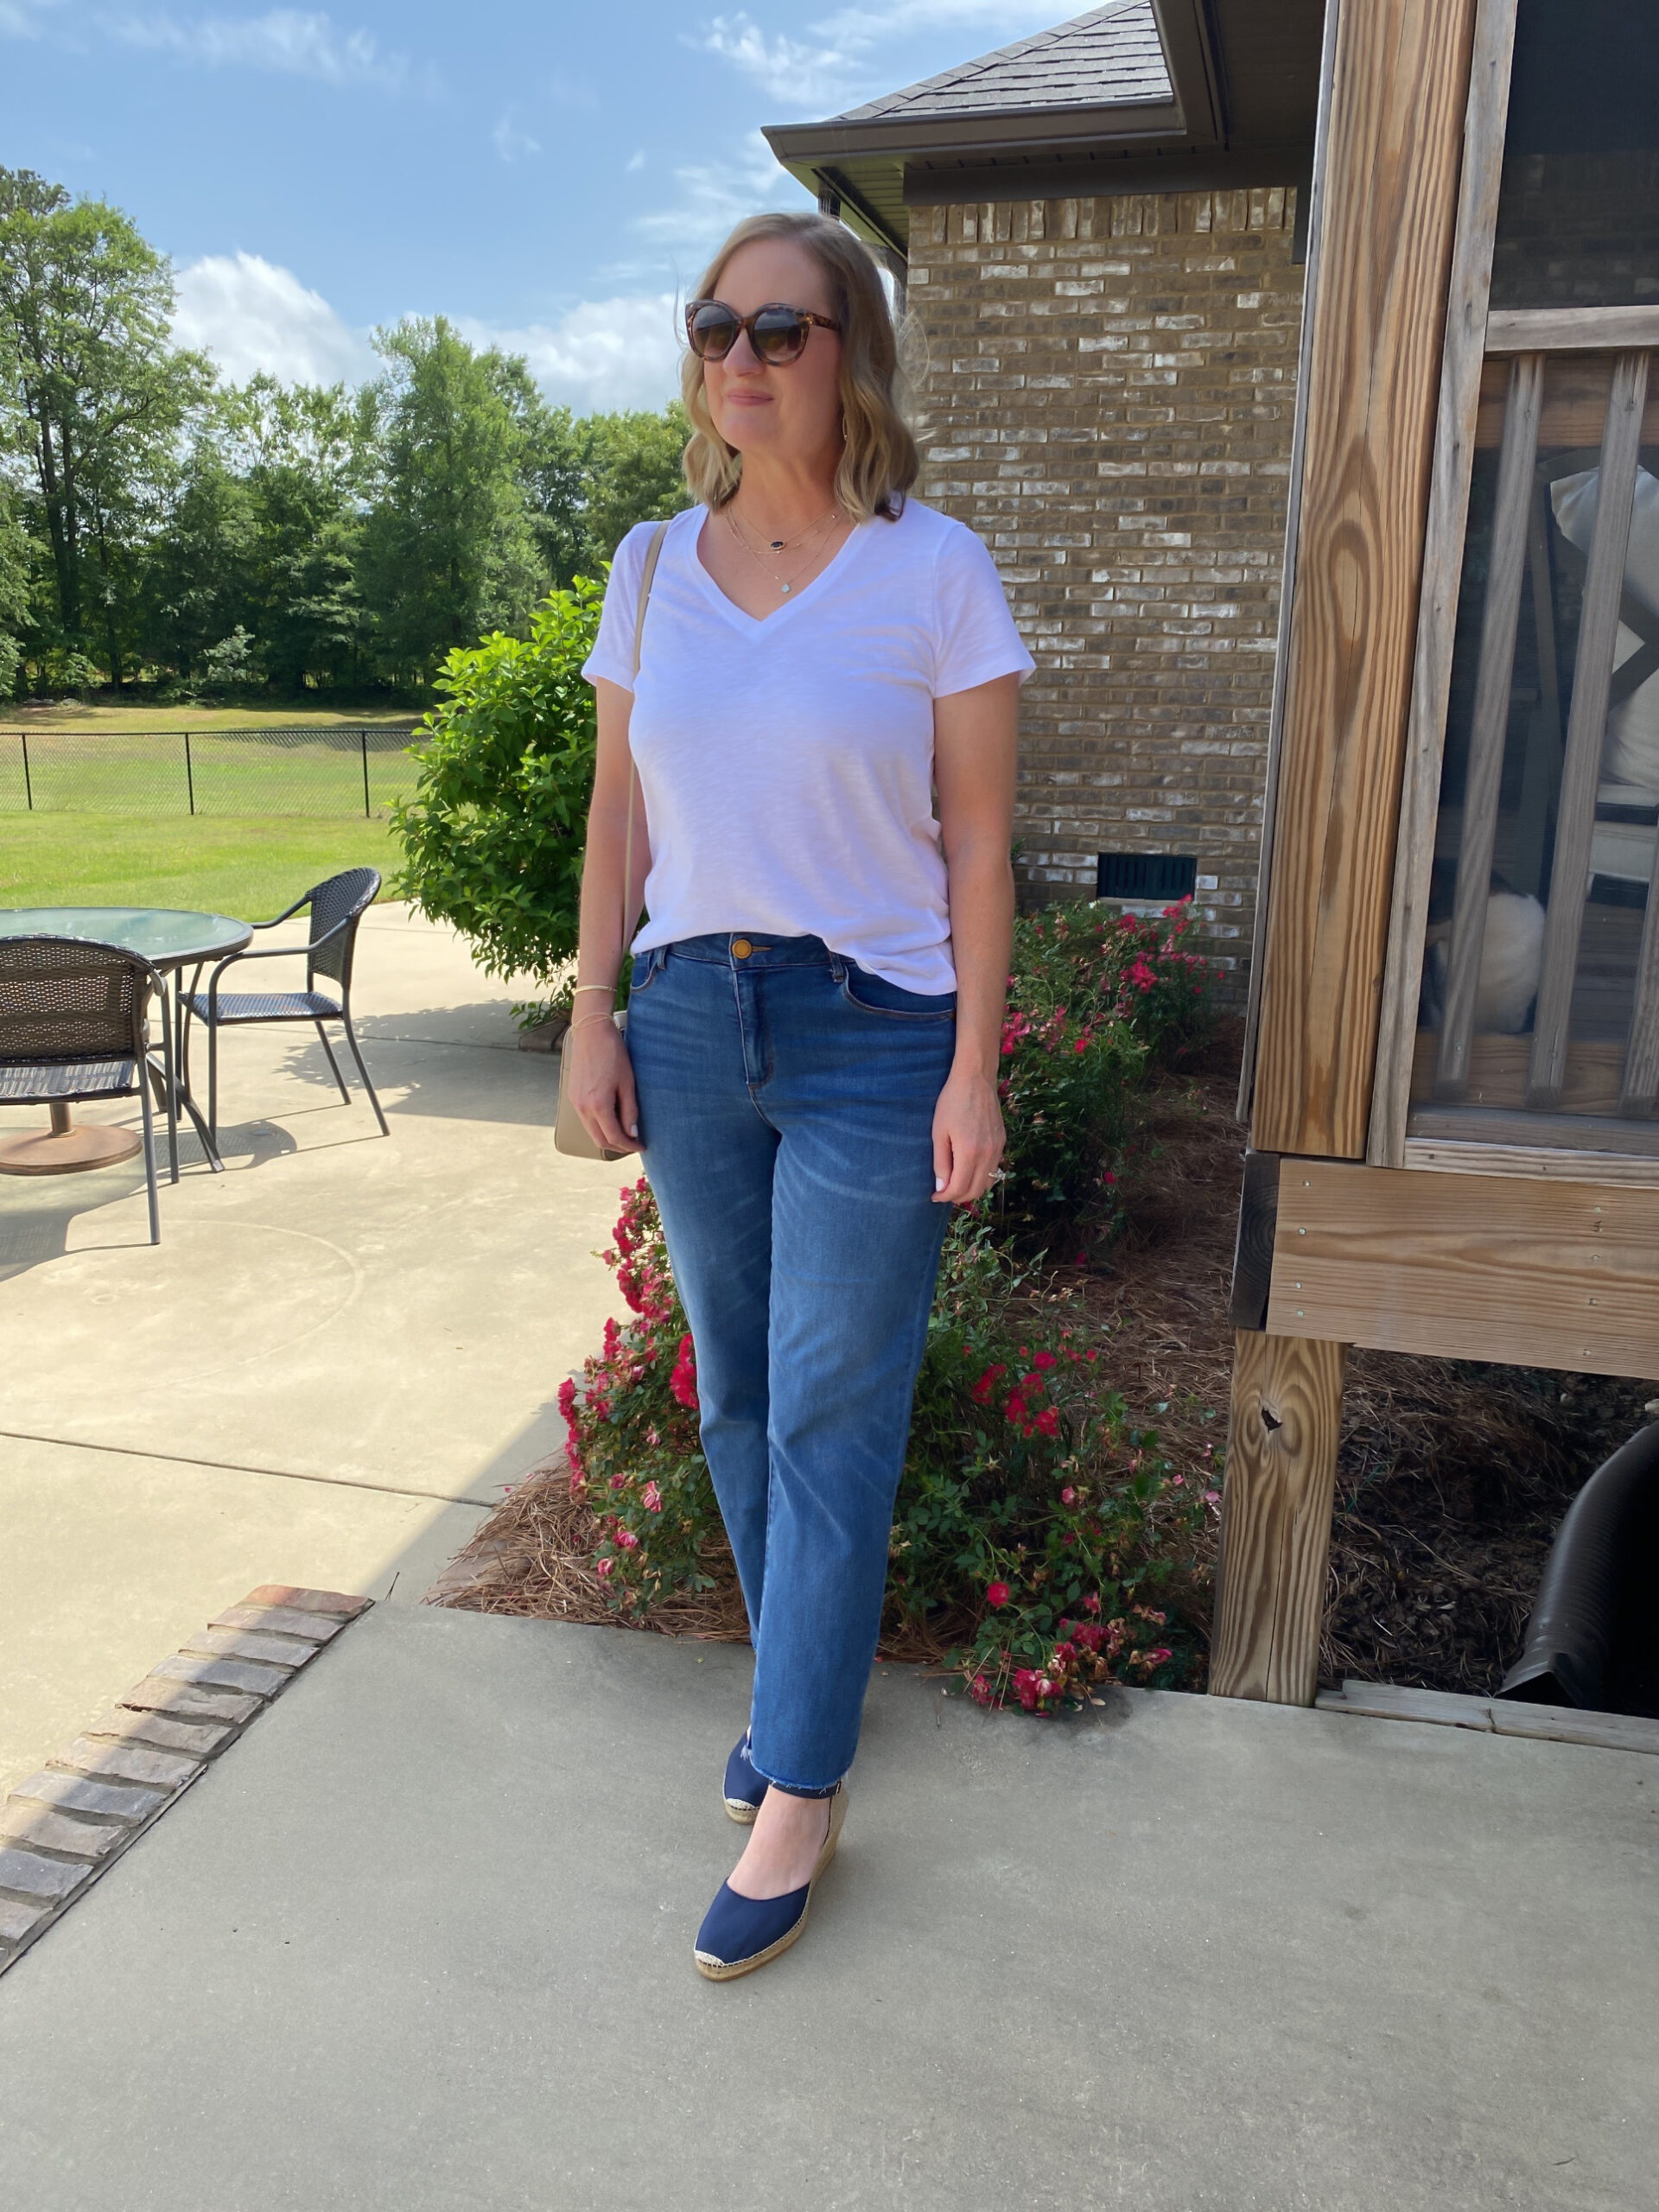 Nordstrom Shoes: How to elevate a simple white tee